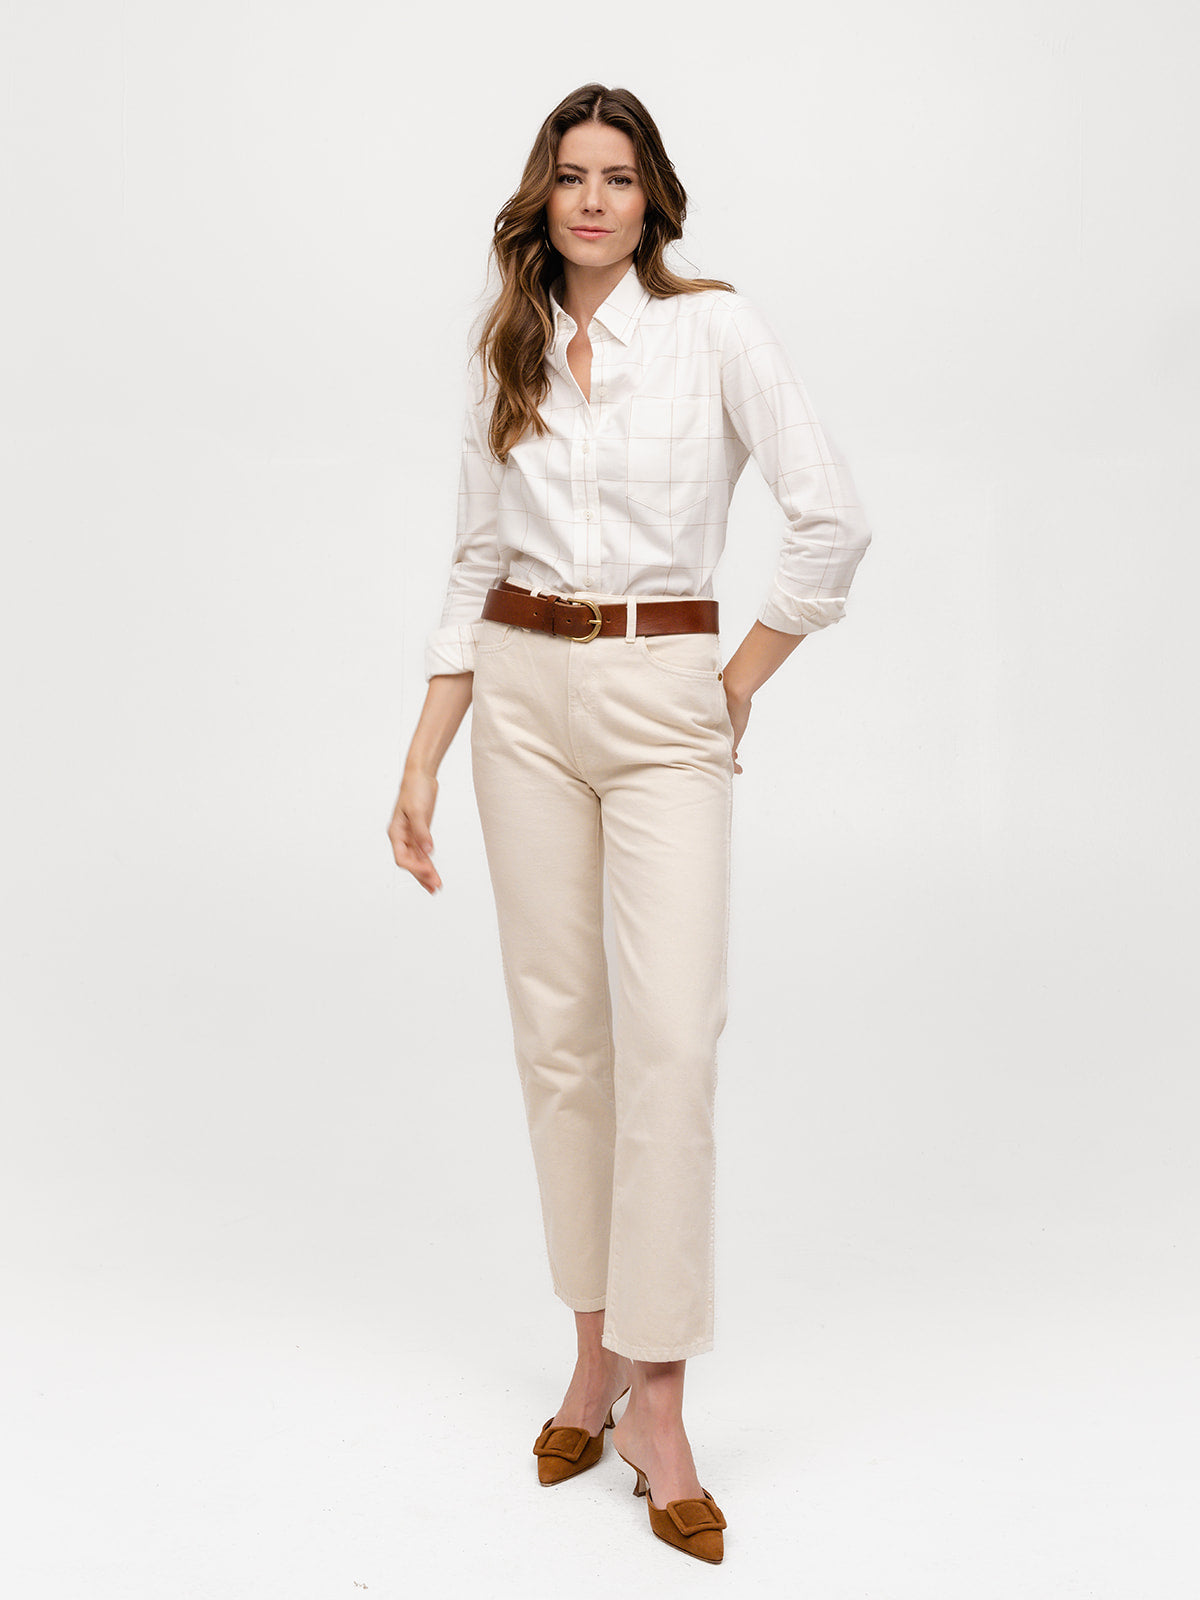 The Signature Shirt for Women of Every Shape and Age– Sarah Alexandra